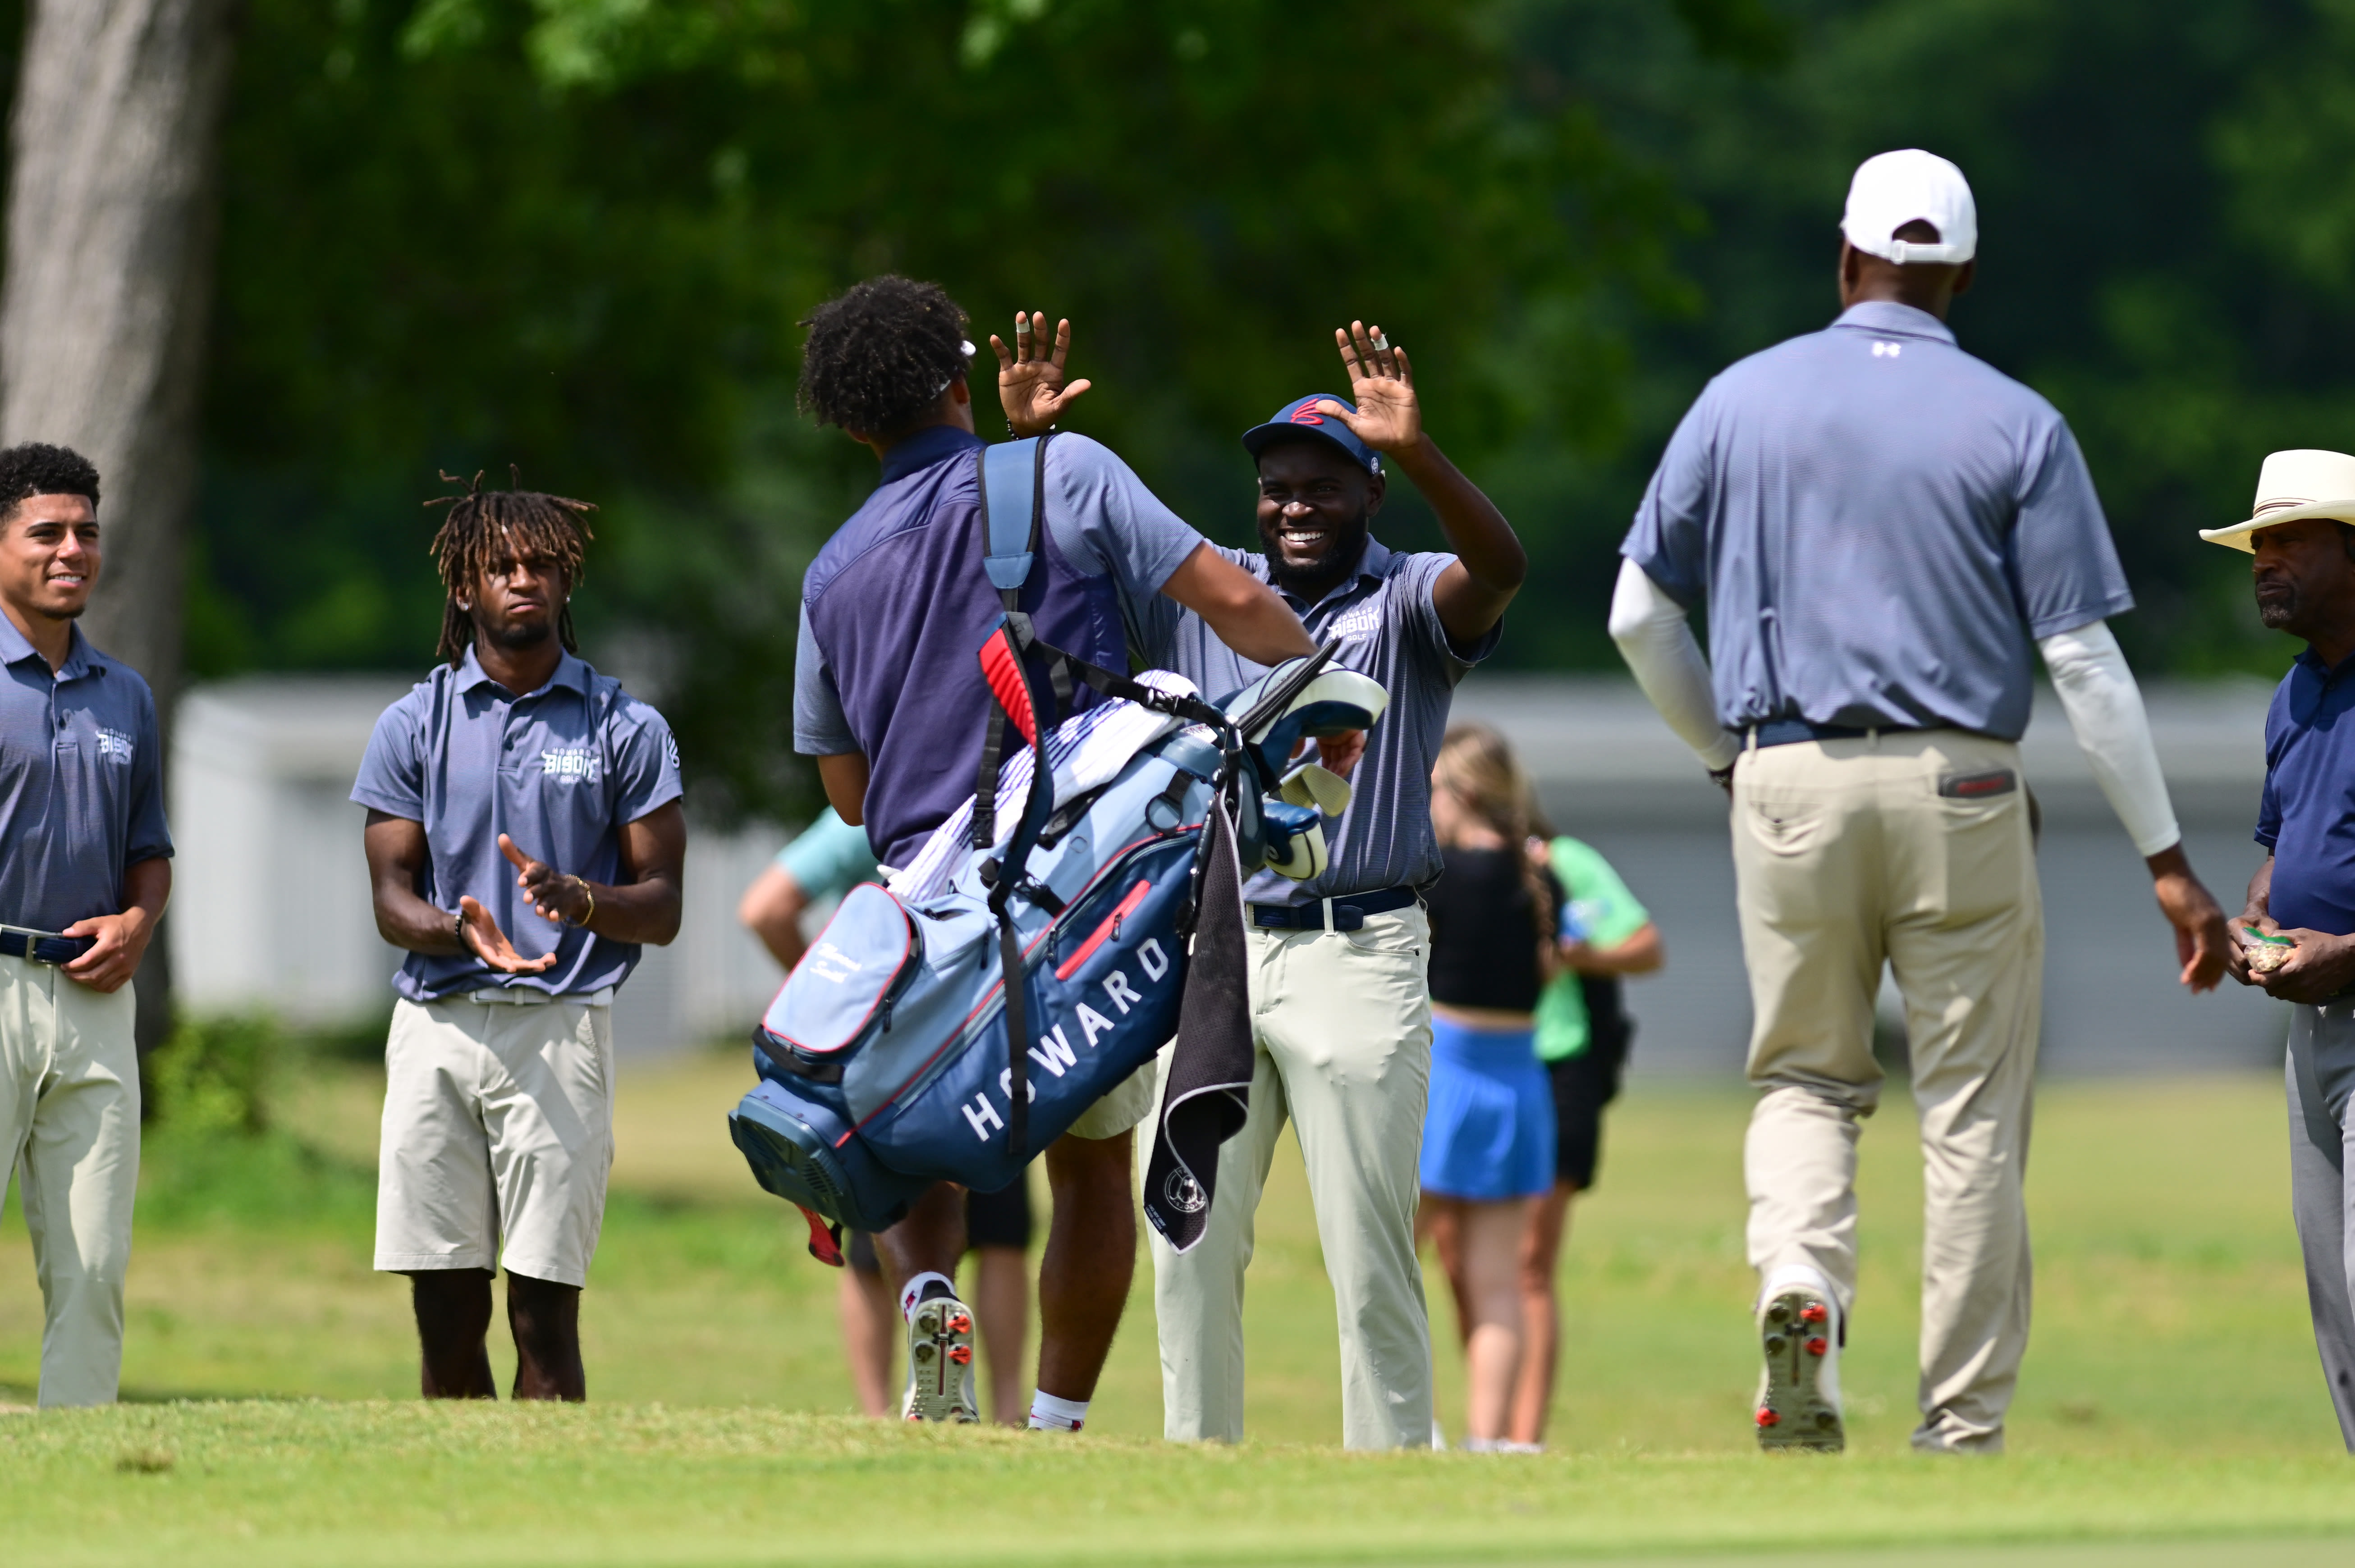 The Howard University men's team was all smiles after Round 2.